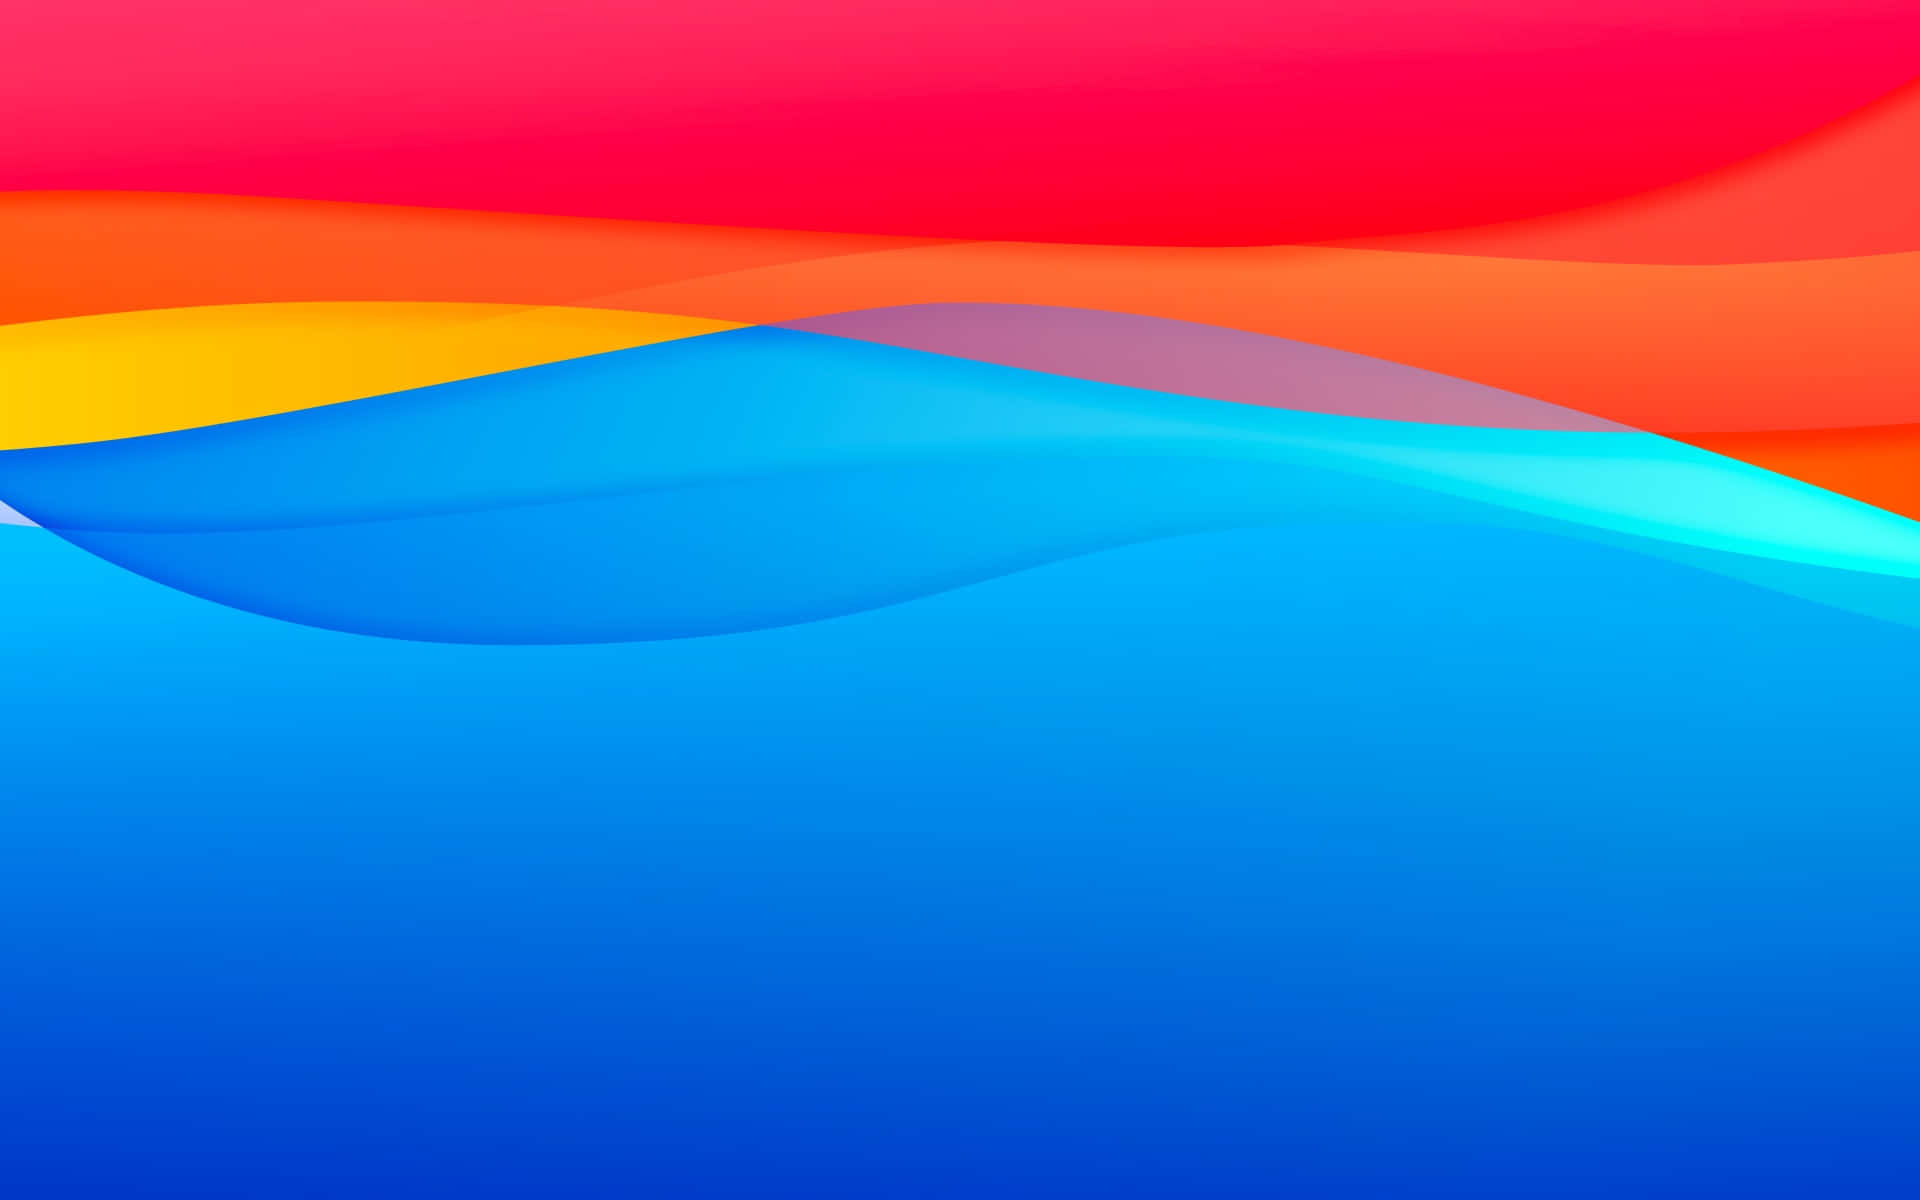 A Colorful Background With A Blue, Red, And Orange Color Wallpaper